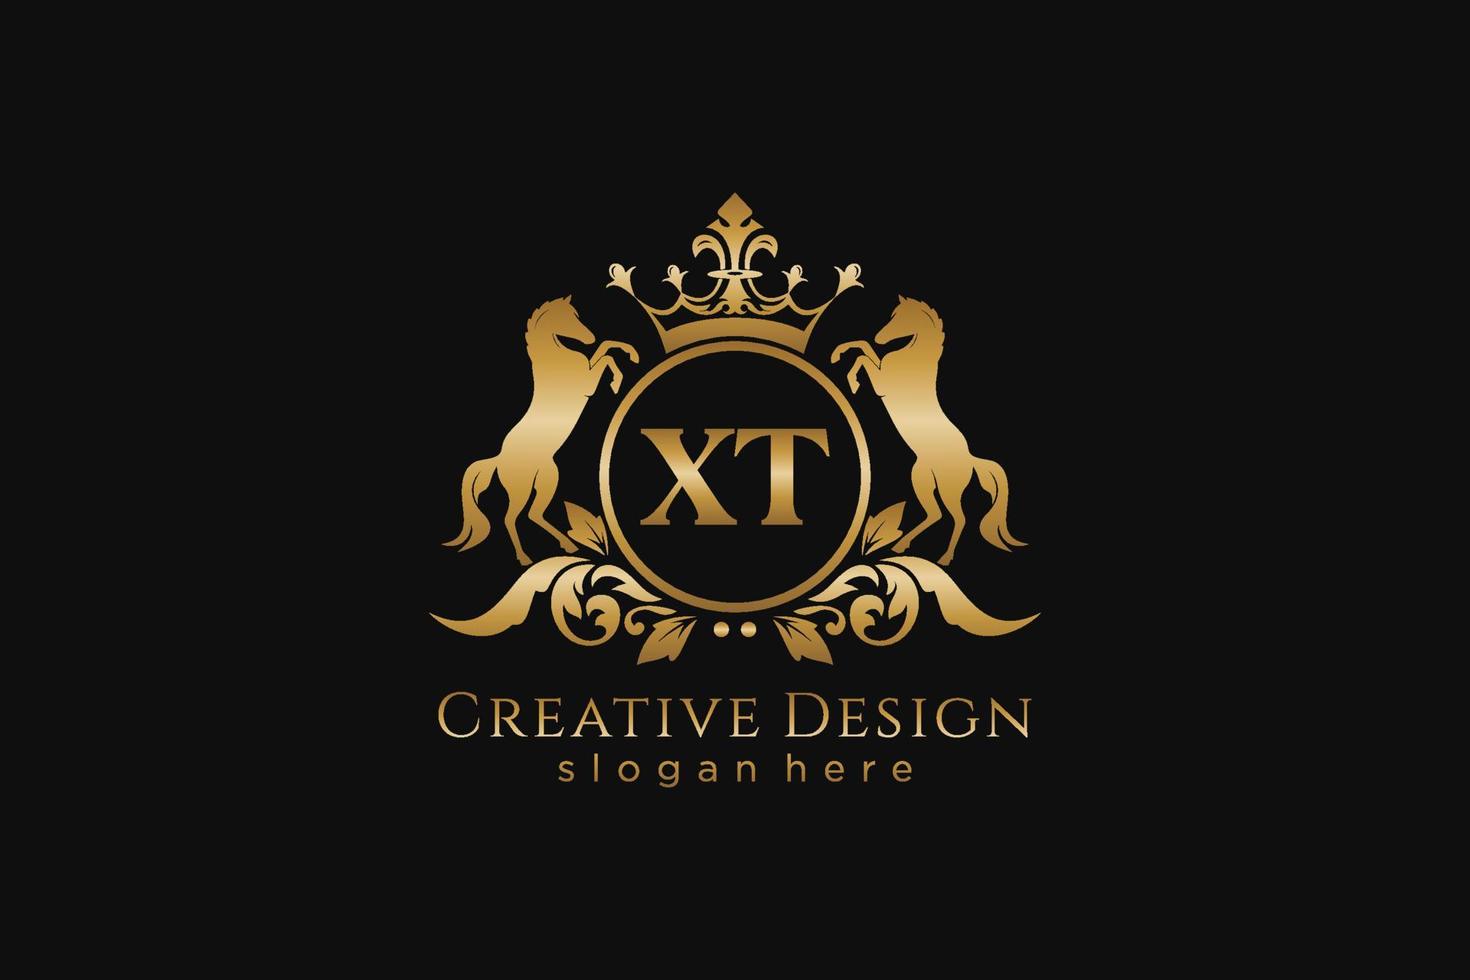 initial XT Retro golden crest with circle and two horses, badge template with scrolls and royal crown - perfect for luxurious branding projects vector